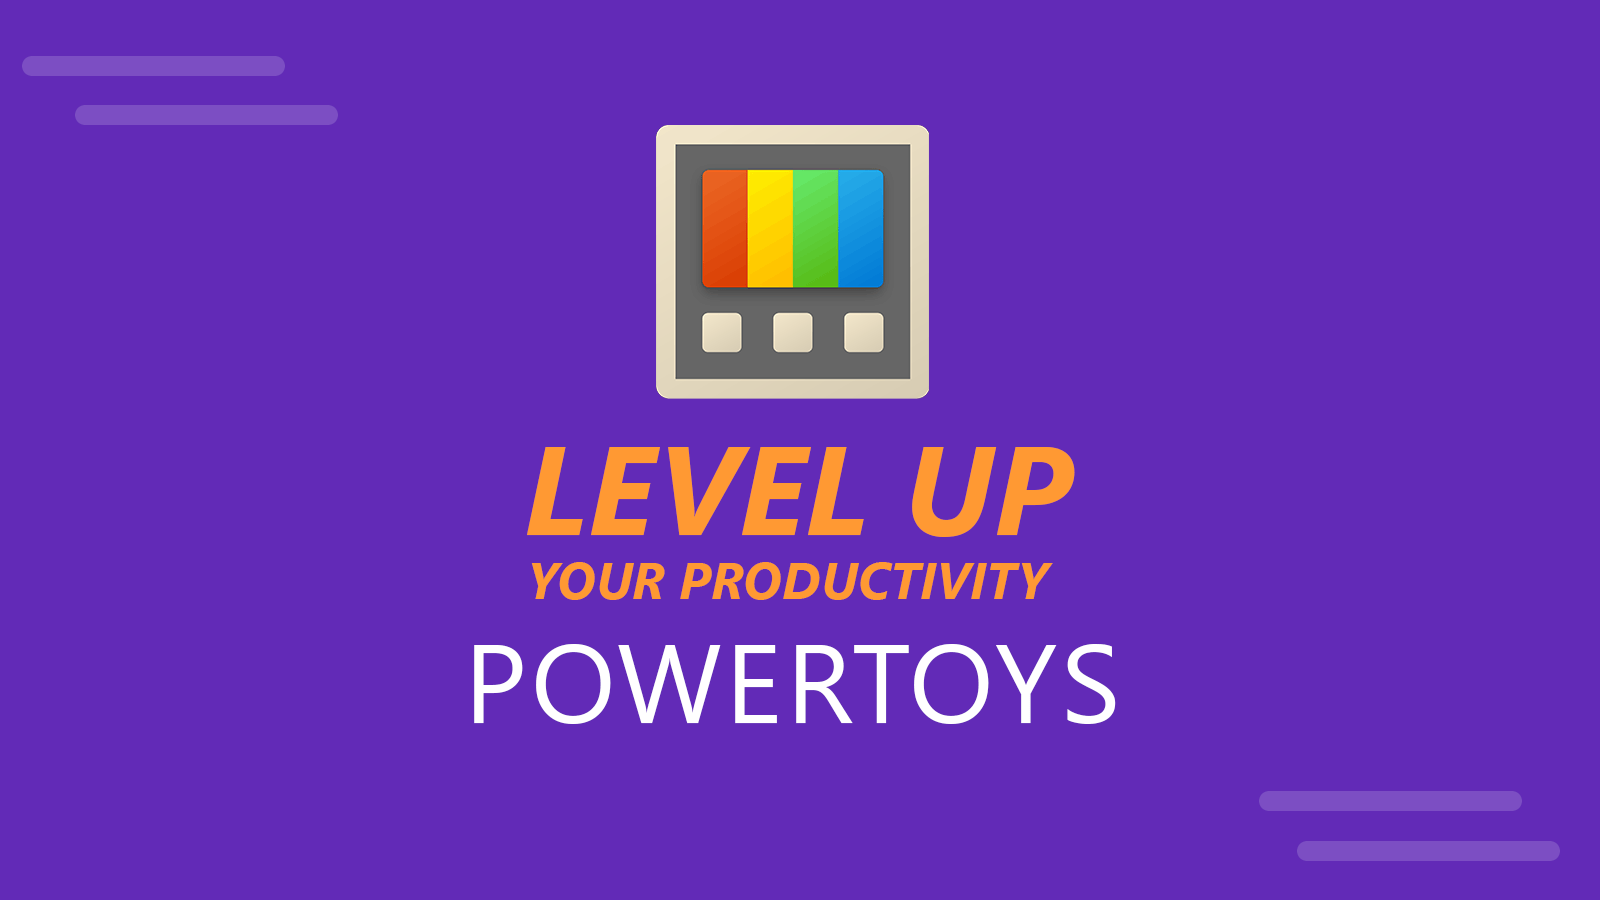 PowerToys: Level Up Your Productivity as a Presenter